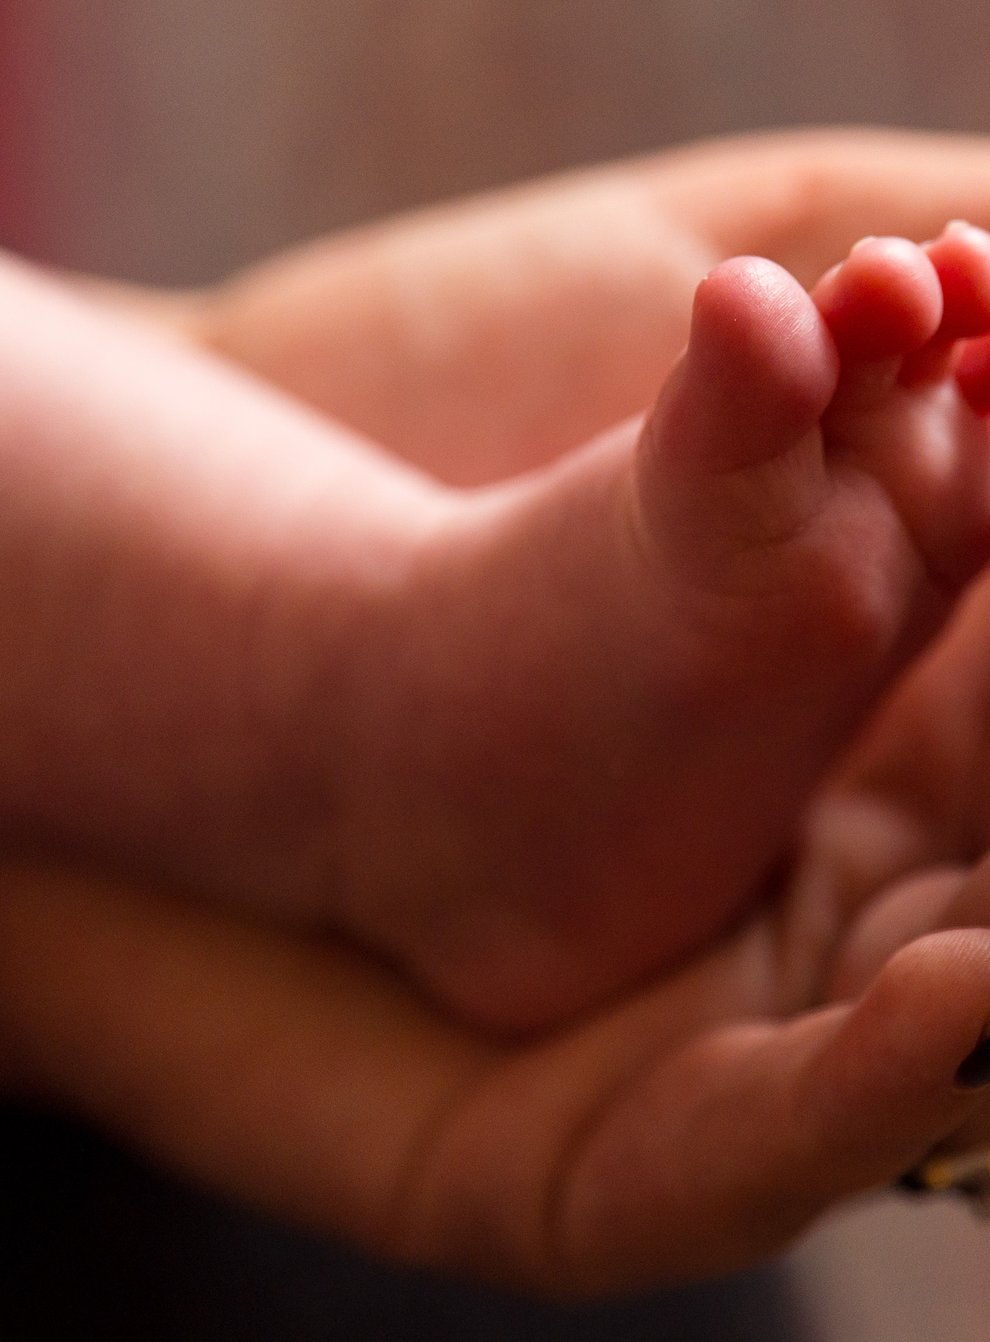 Undated file photo of a mother holding the feet of a new baby (Dominic Lipinski/PA)